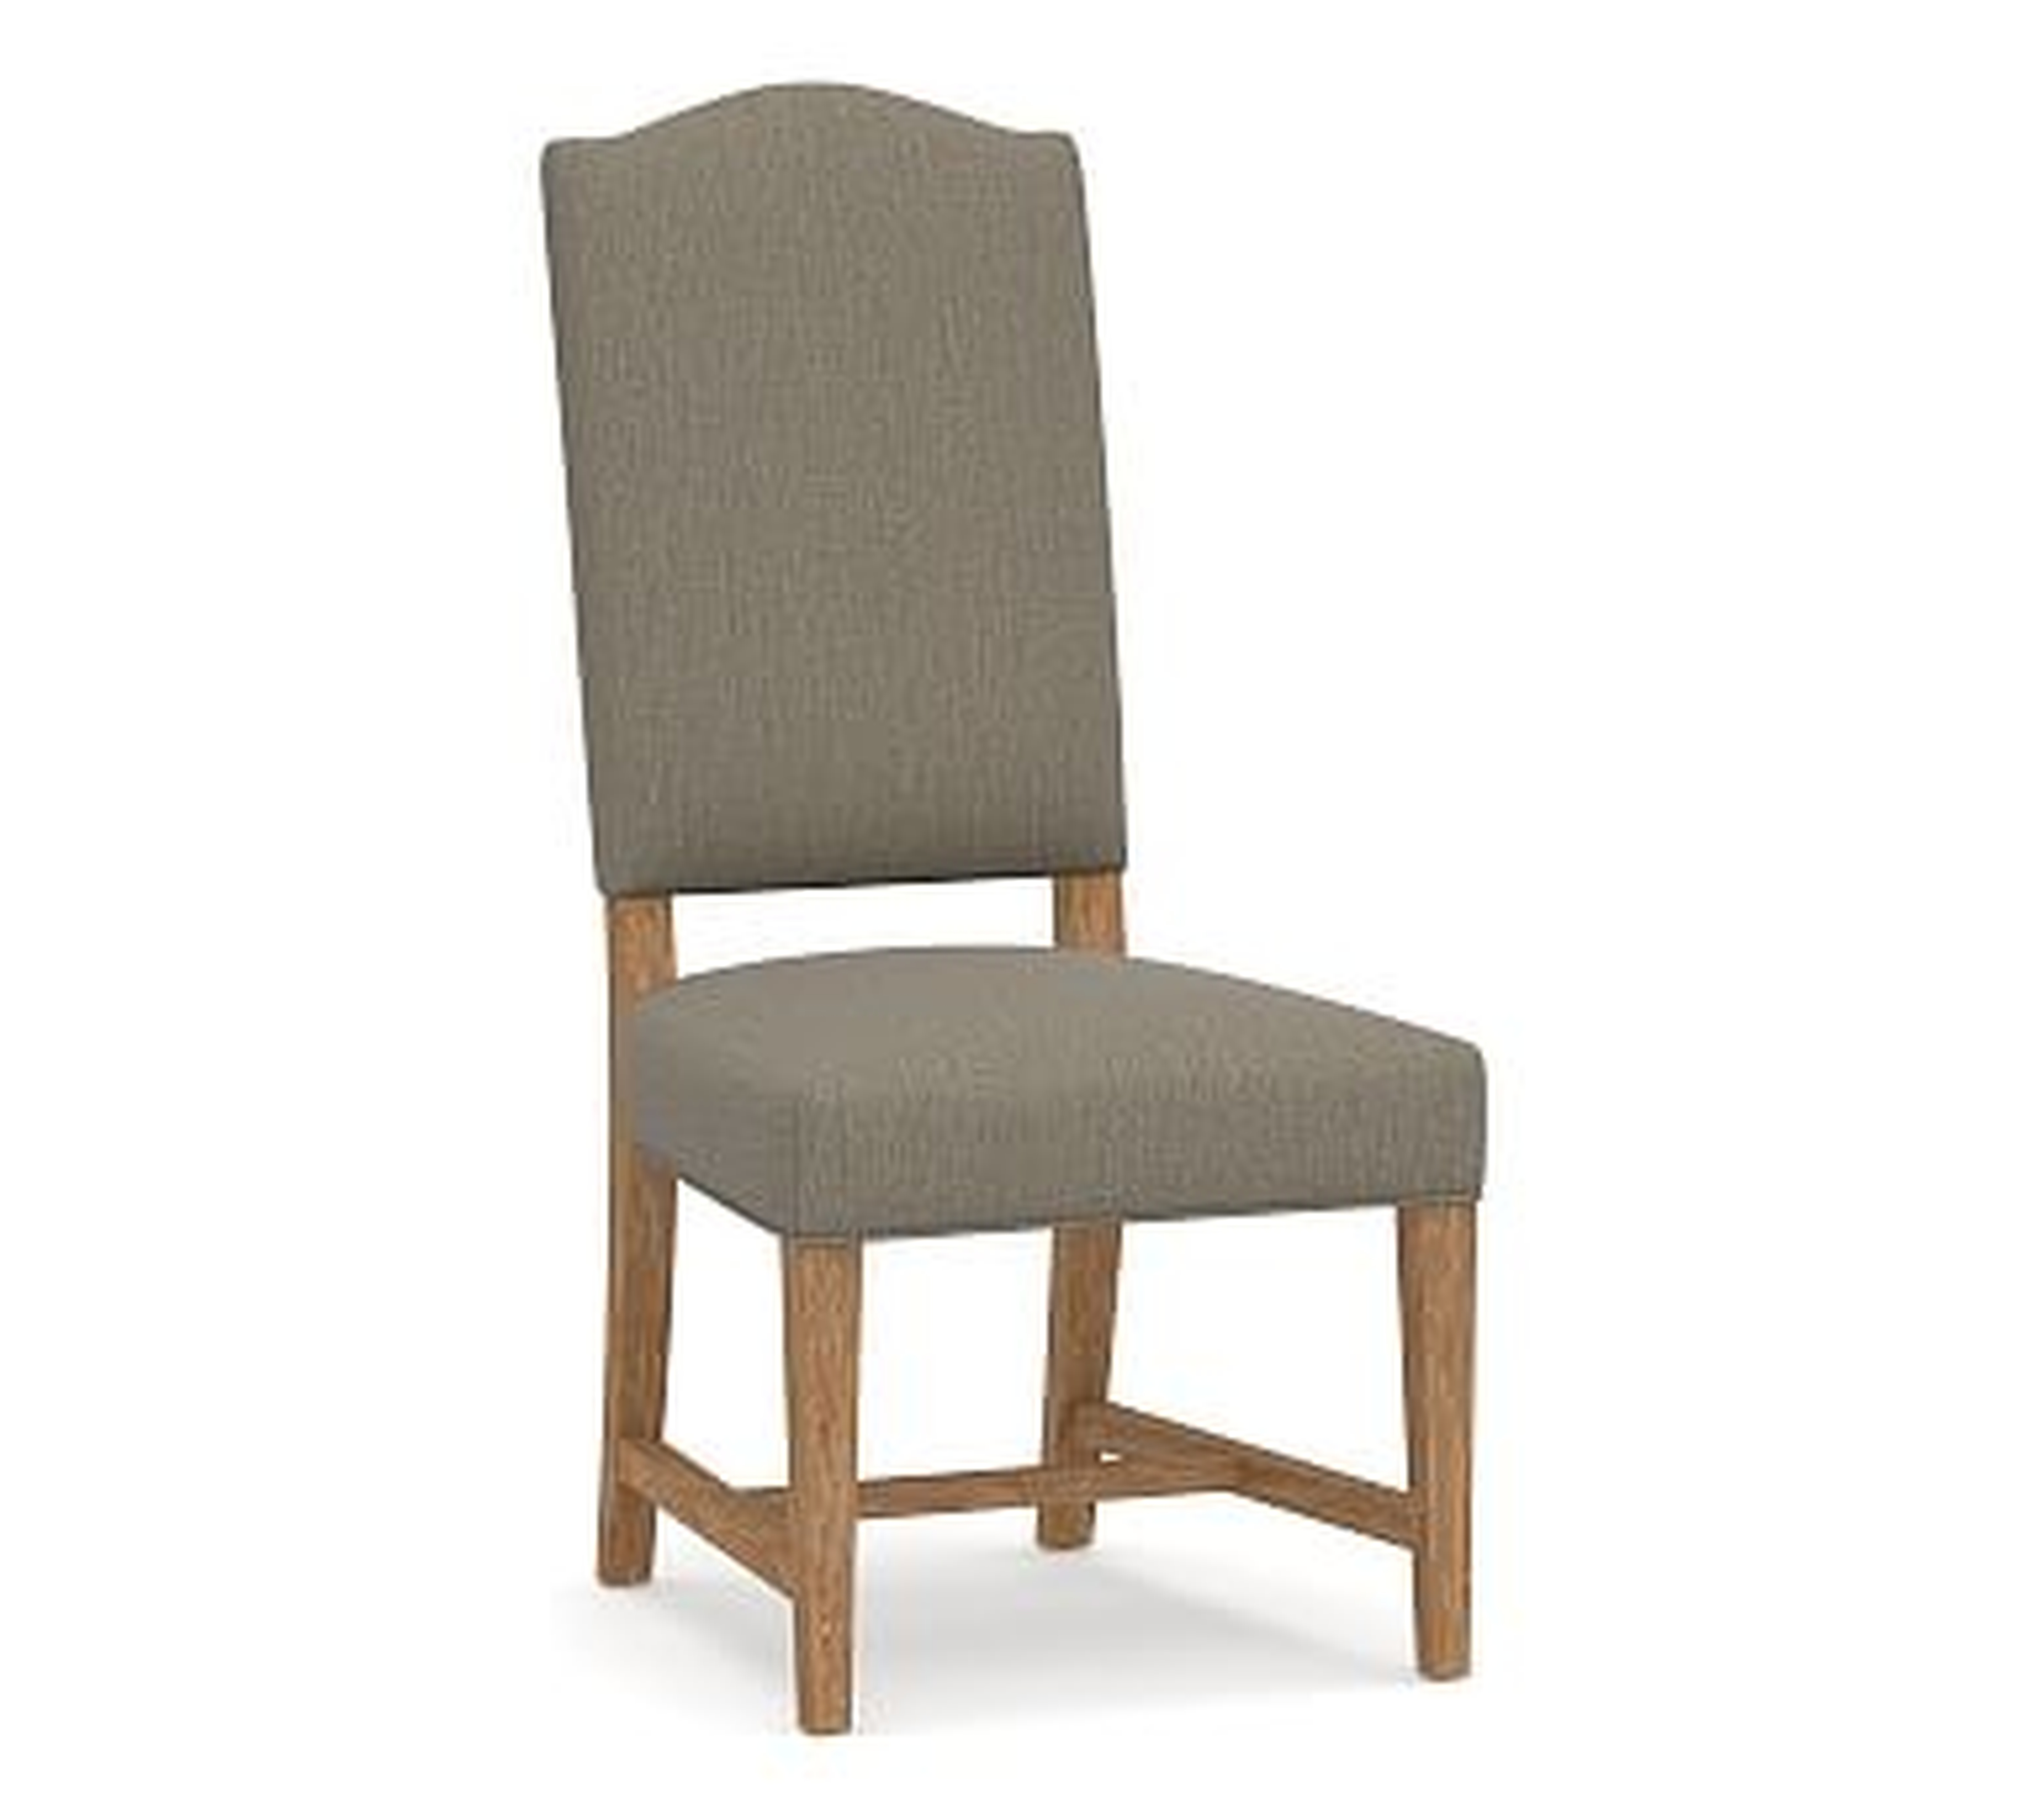 Ashton Upholstered Non-Tufted Dining Side Chair, Ash Brown Frame, Chenille Basketweave Taupe - Pottery Barn